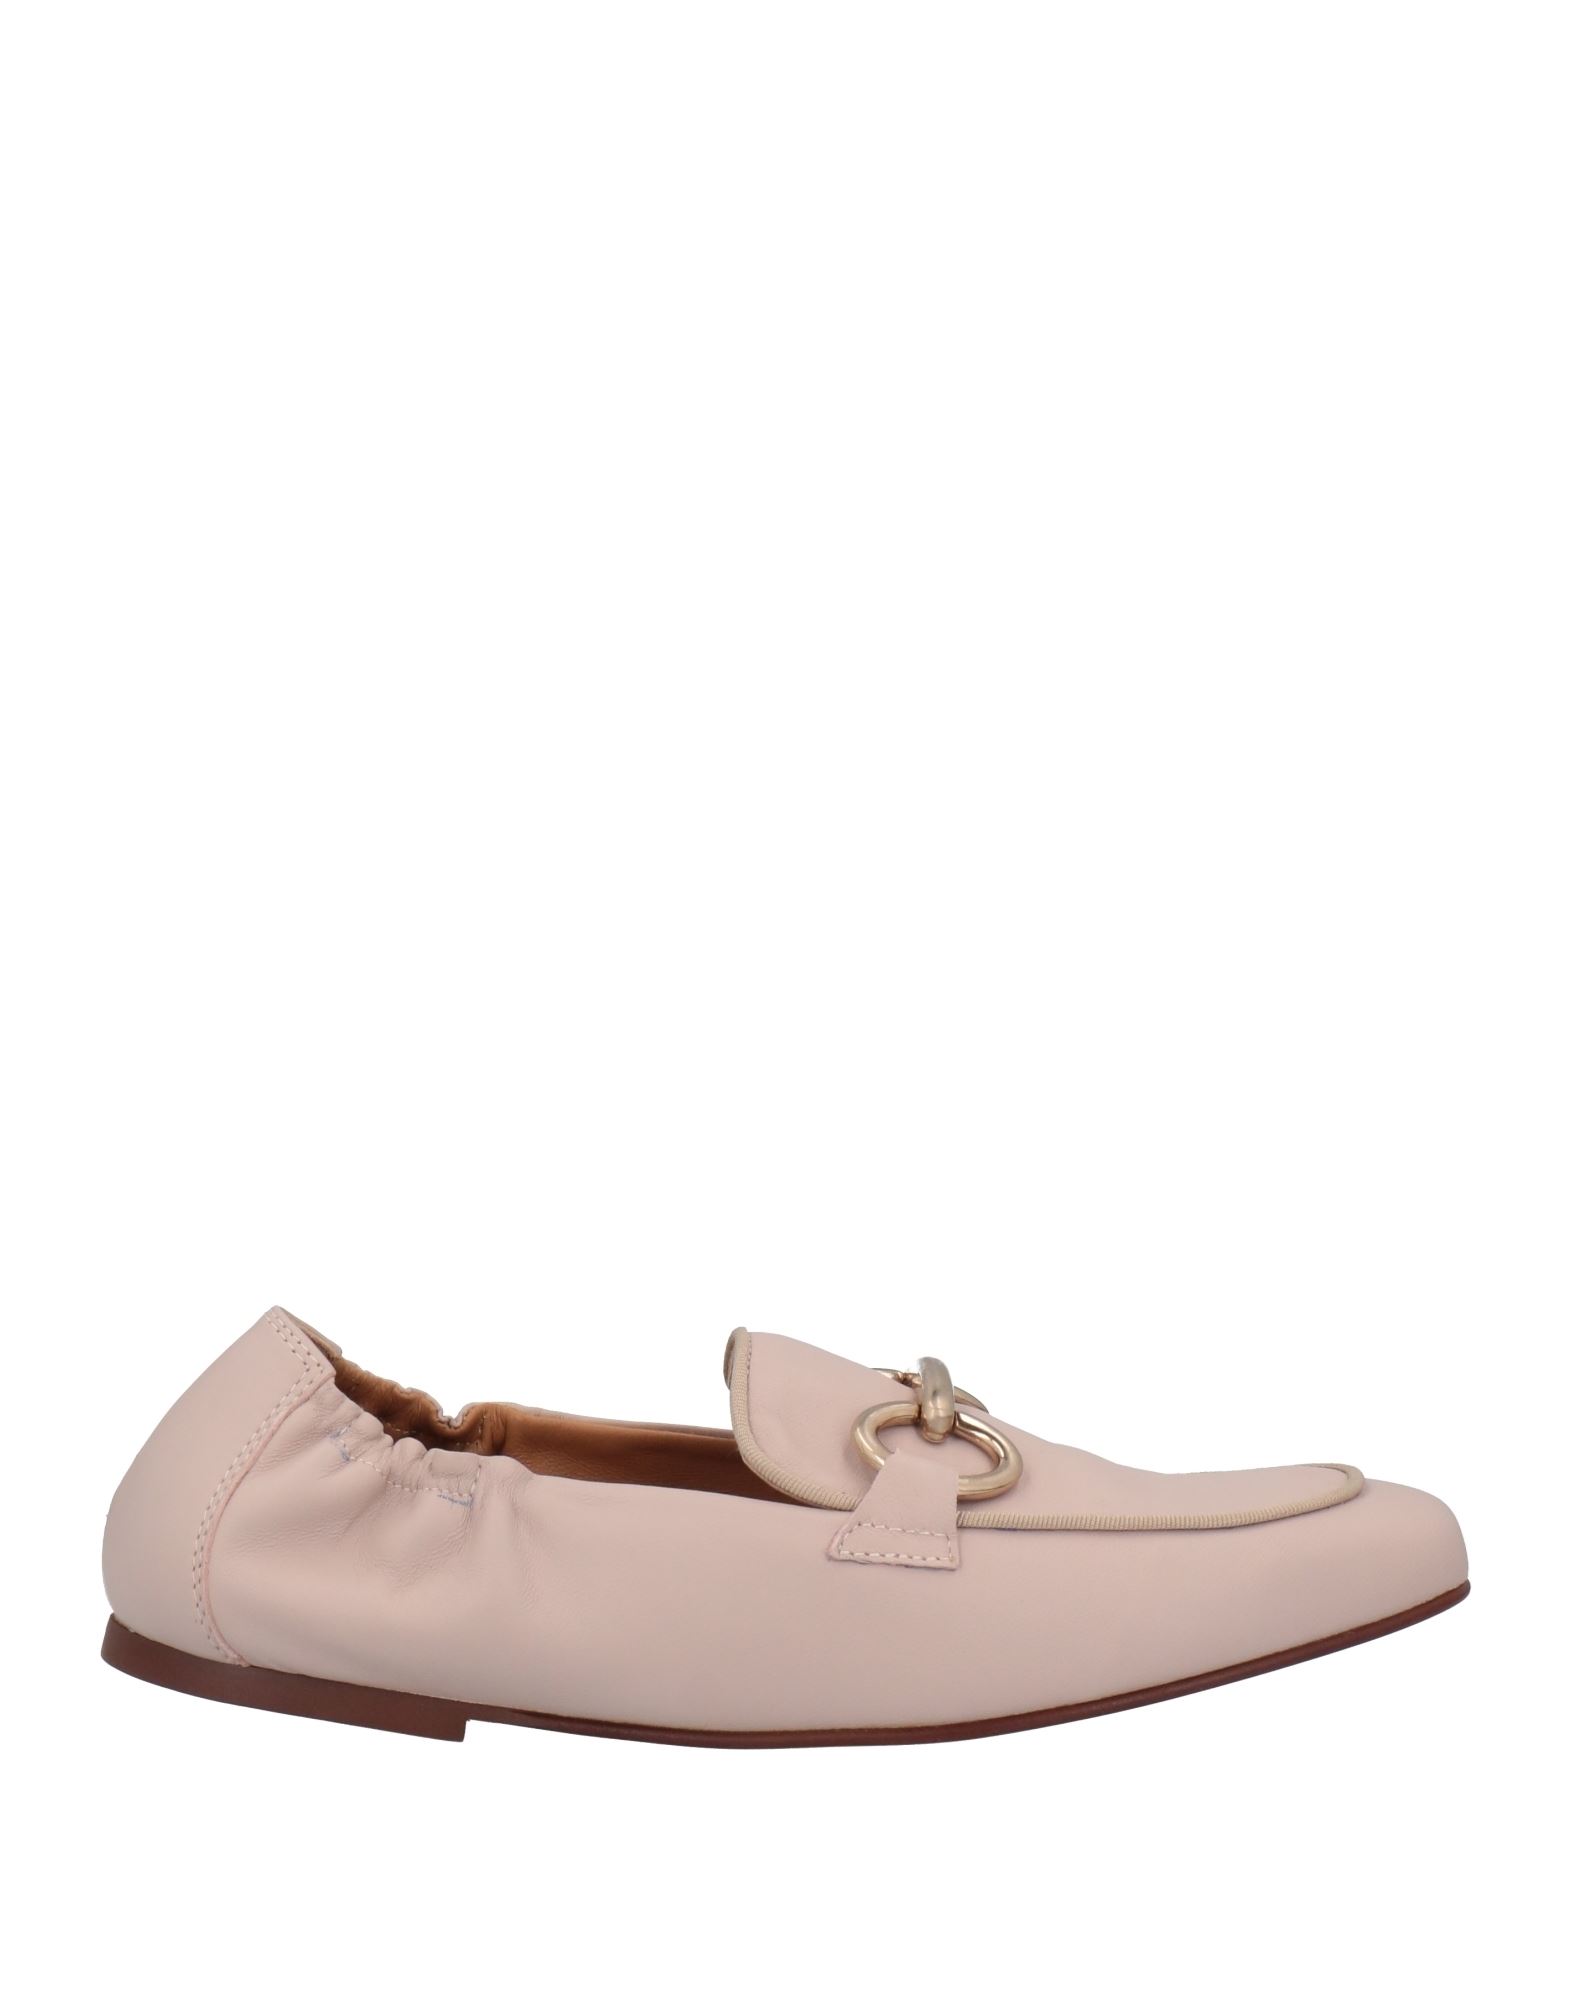 Pedro Miralles Loafers In Blush